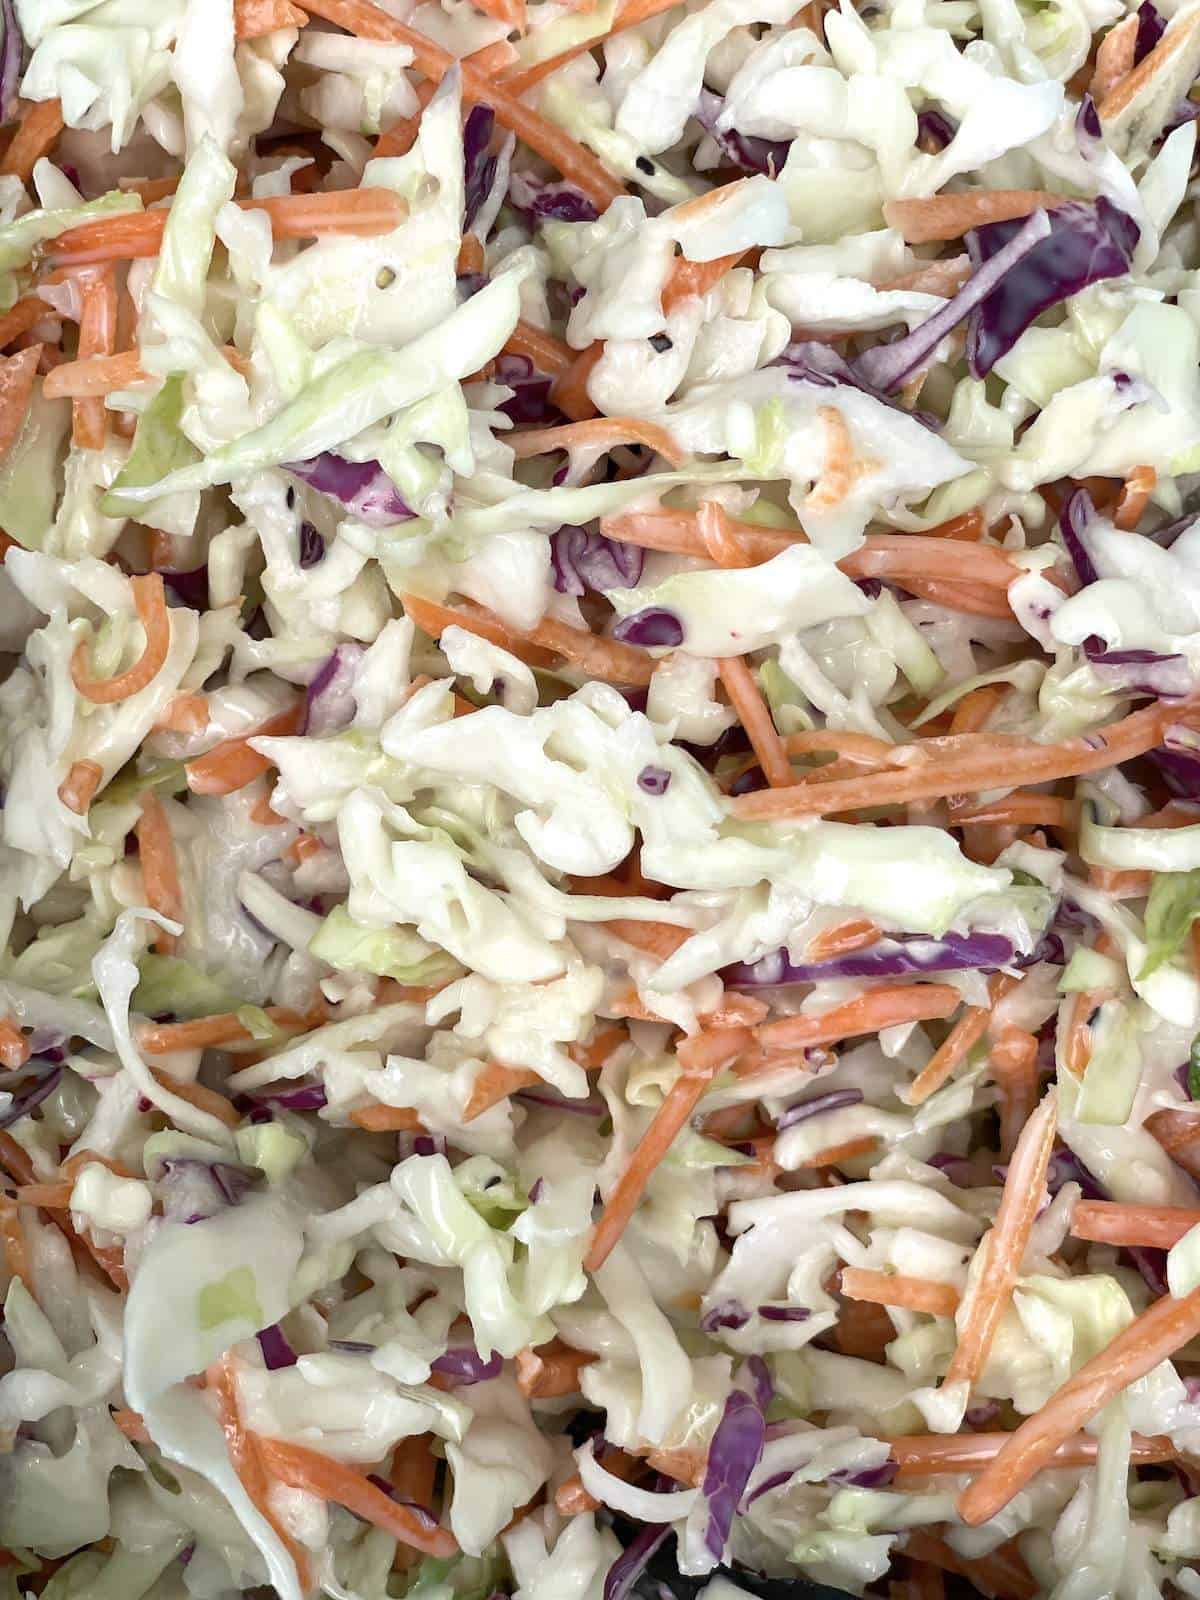 Raising Cane's Coleslaw (shredded carrots & cabbage covered in mayonnaise) up close.